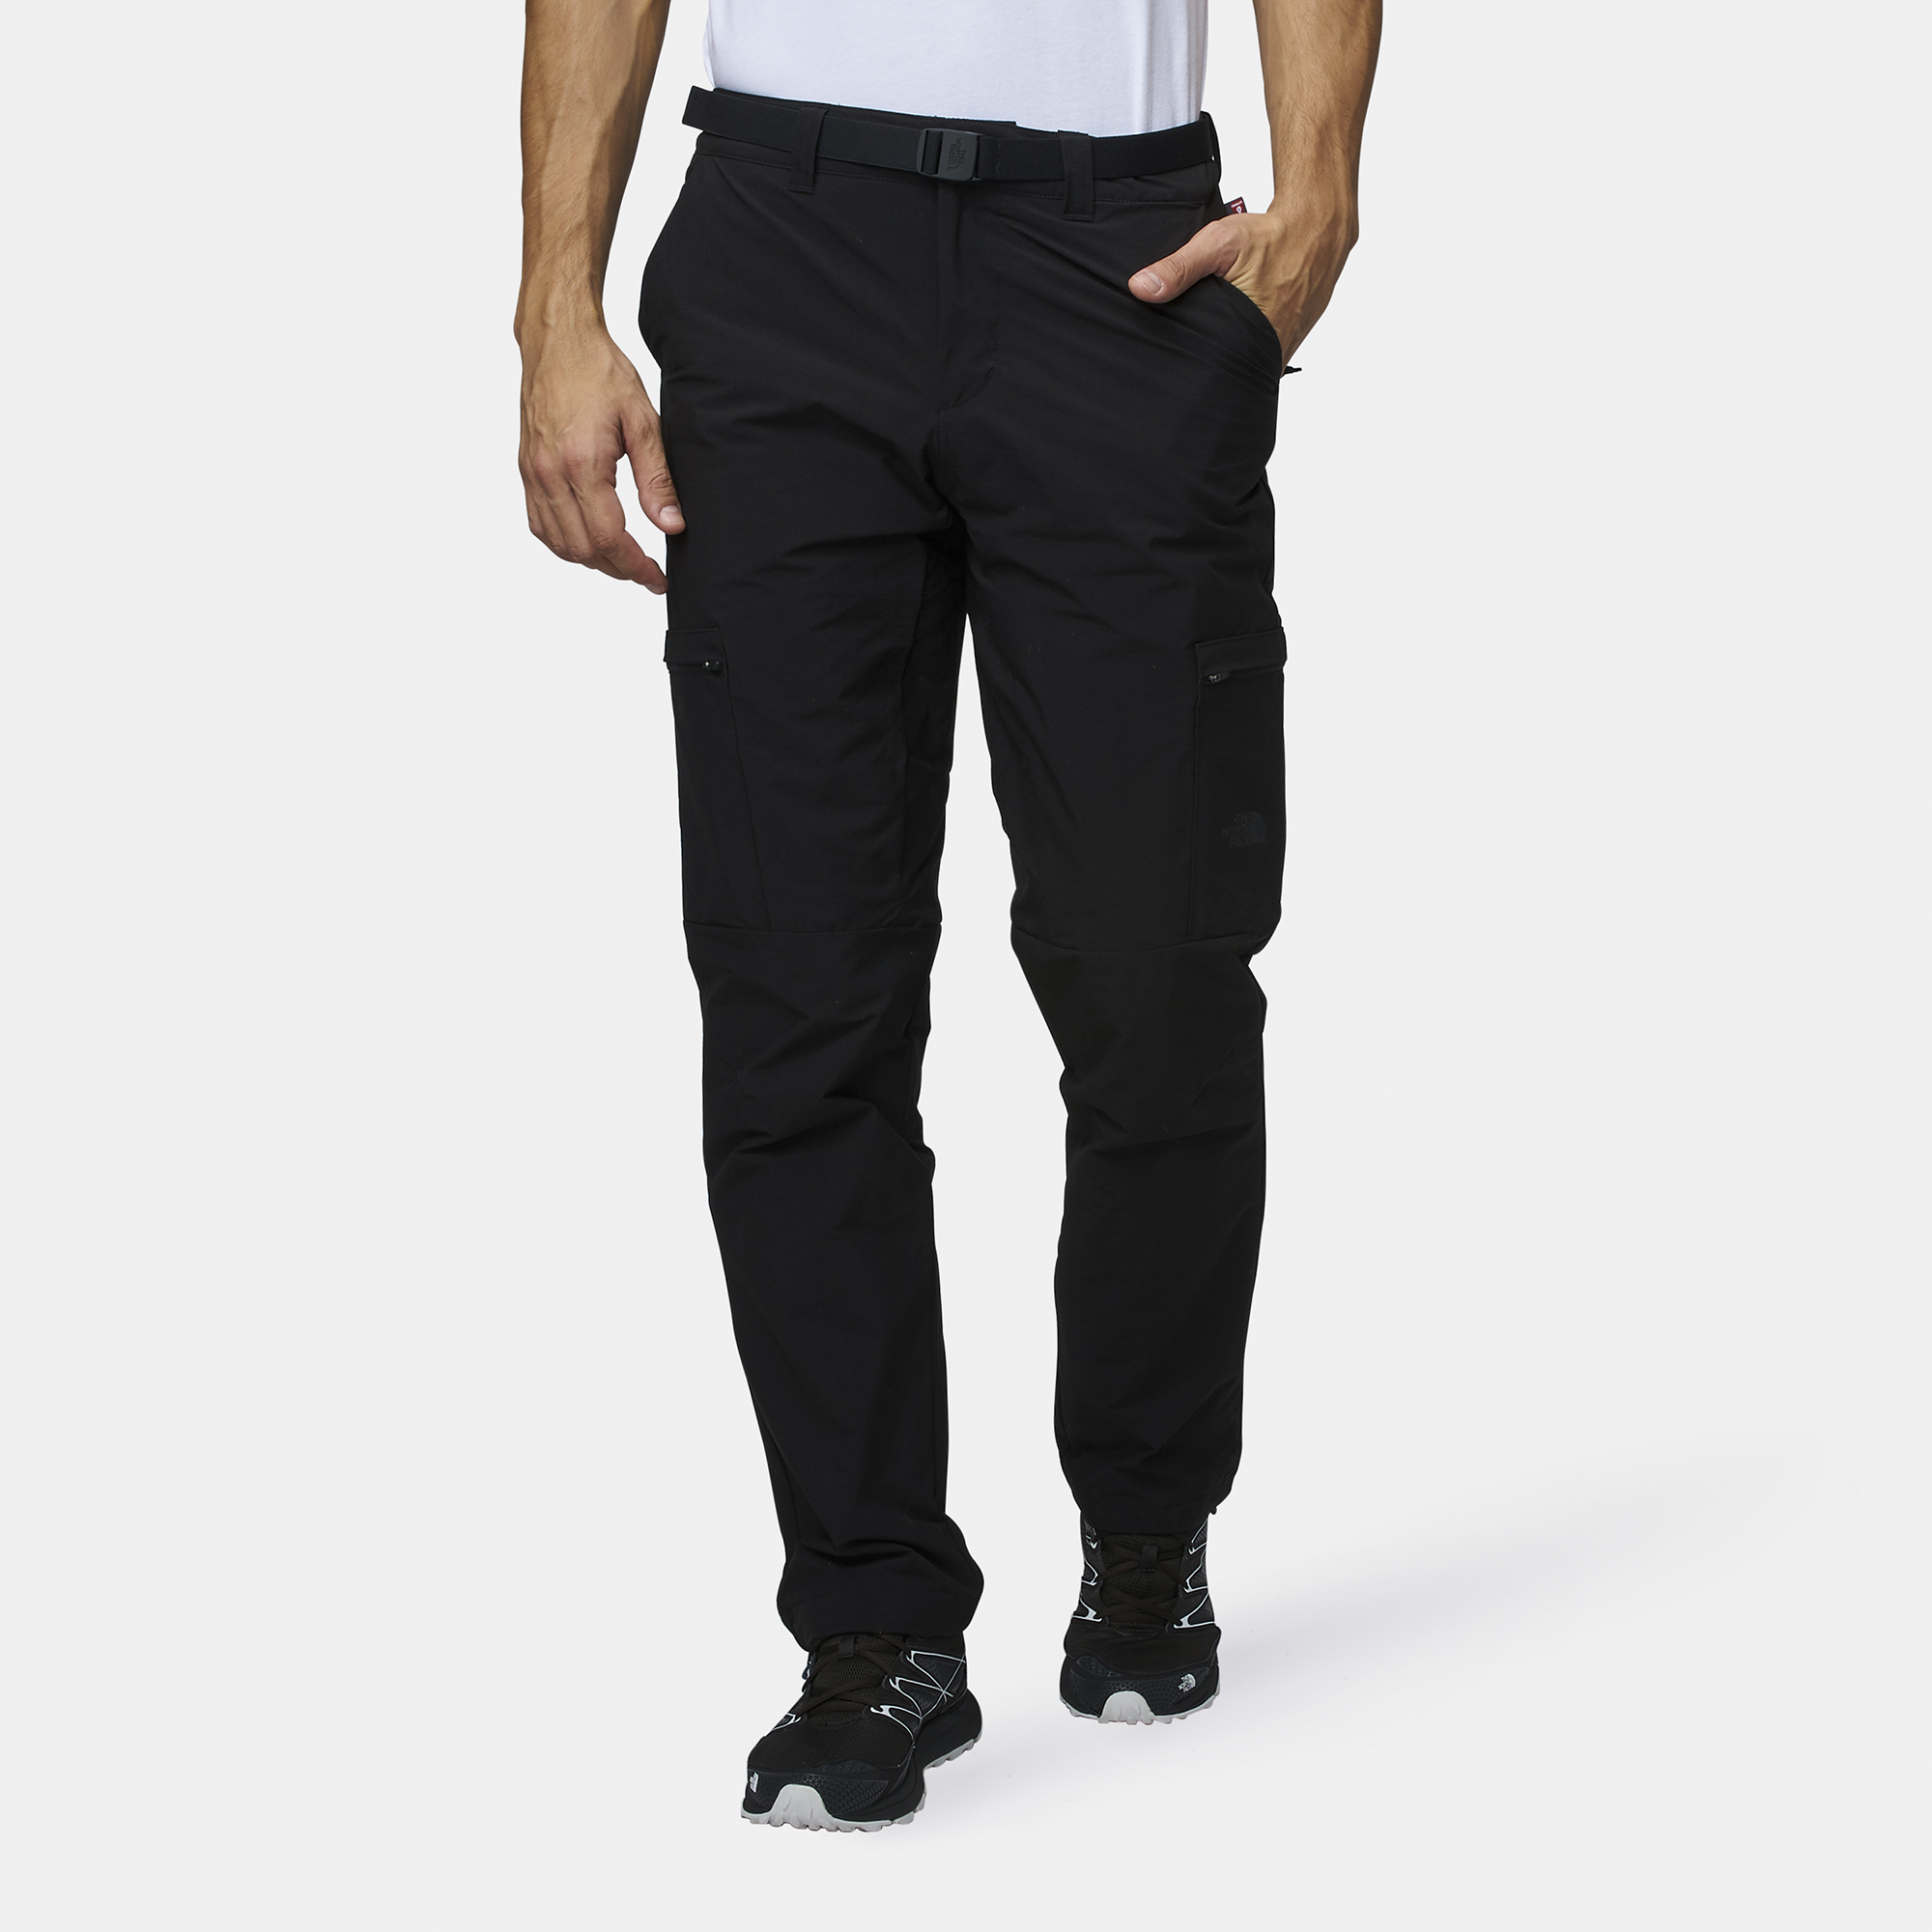 north face walking trousers